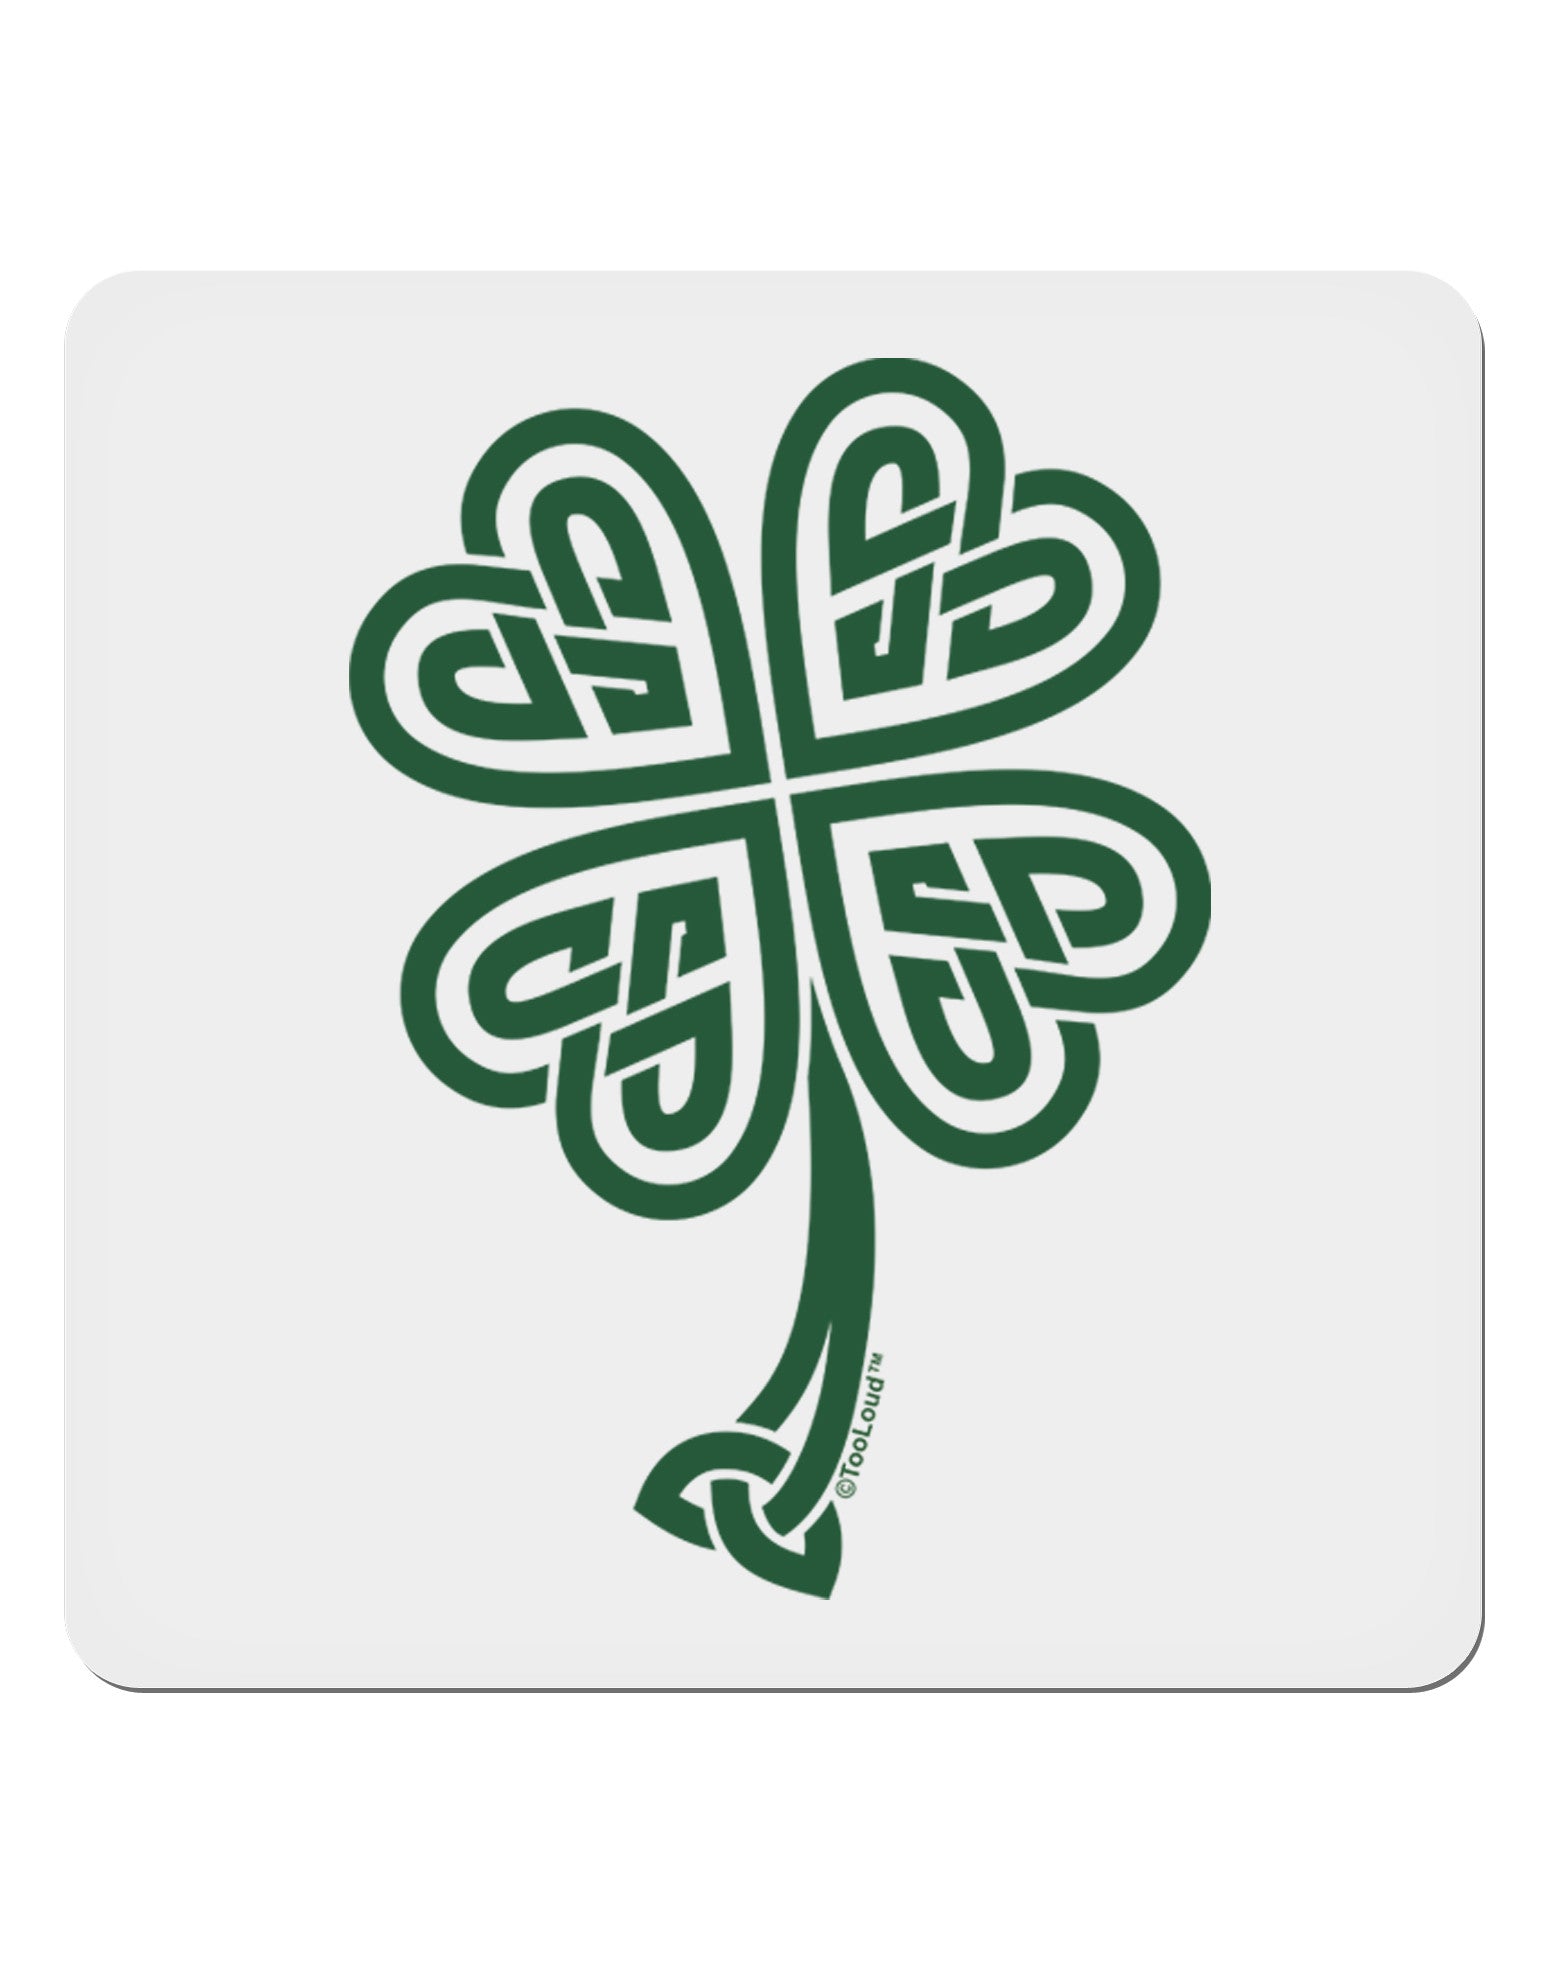 St. Patrick's Day: Four Leaves Clover Car Magnet - Magnetic Decal